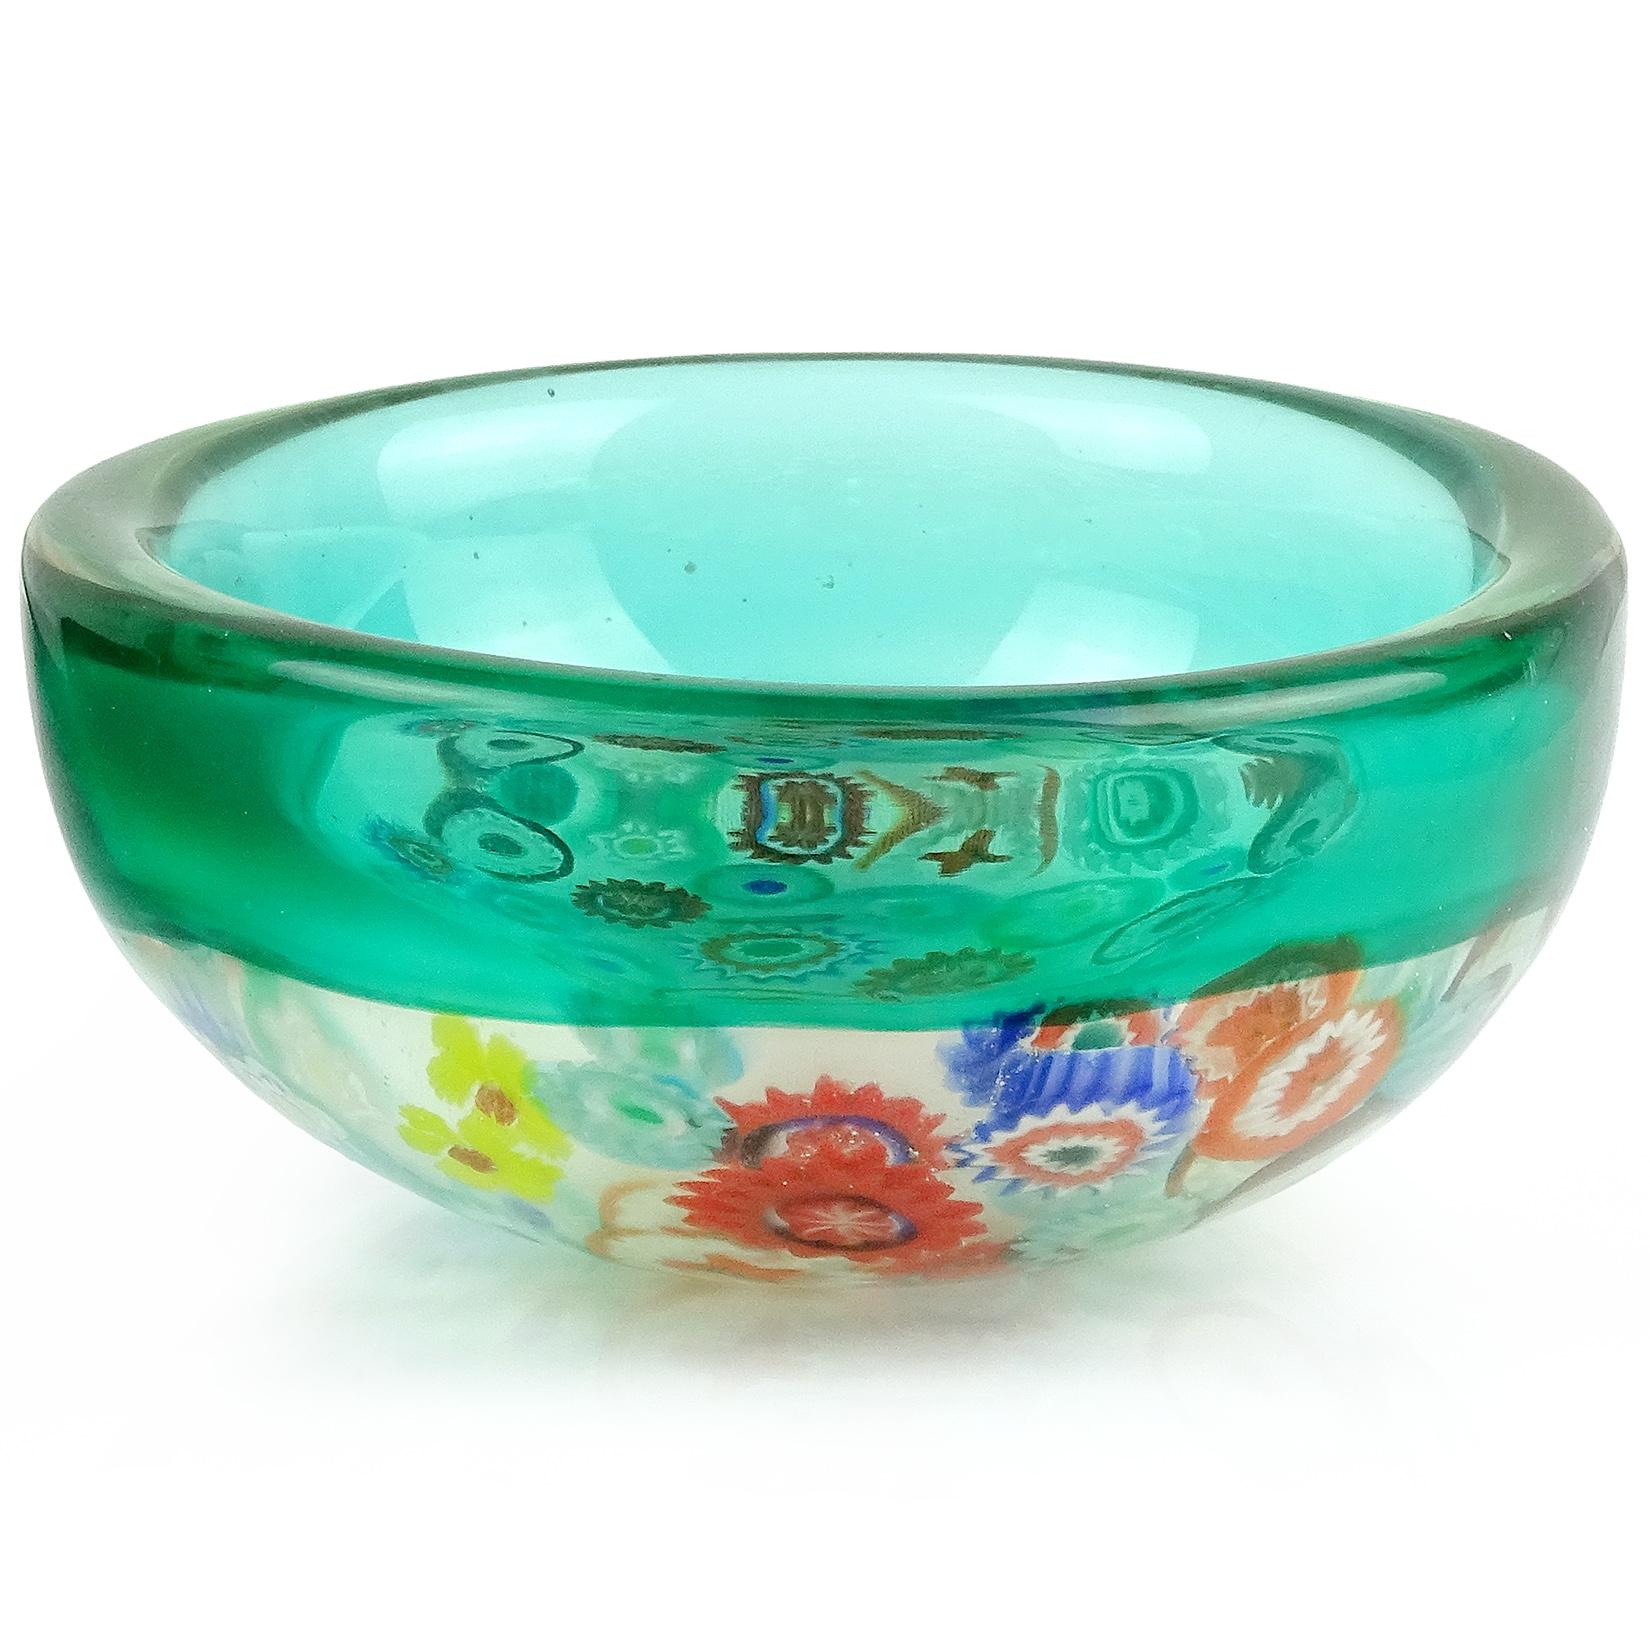 Beautiful vintage Murano hand blown Millefiori flower canes and green Incalmo rim Italian art glass round bowl. Documented to designer Archimede Seguso. The murine pieces are all different colors and designs. Can be used as a display piece on any